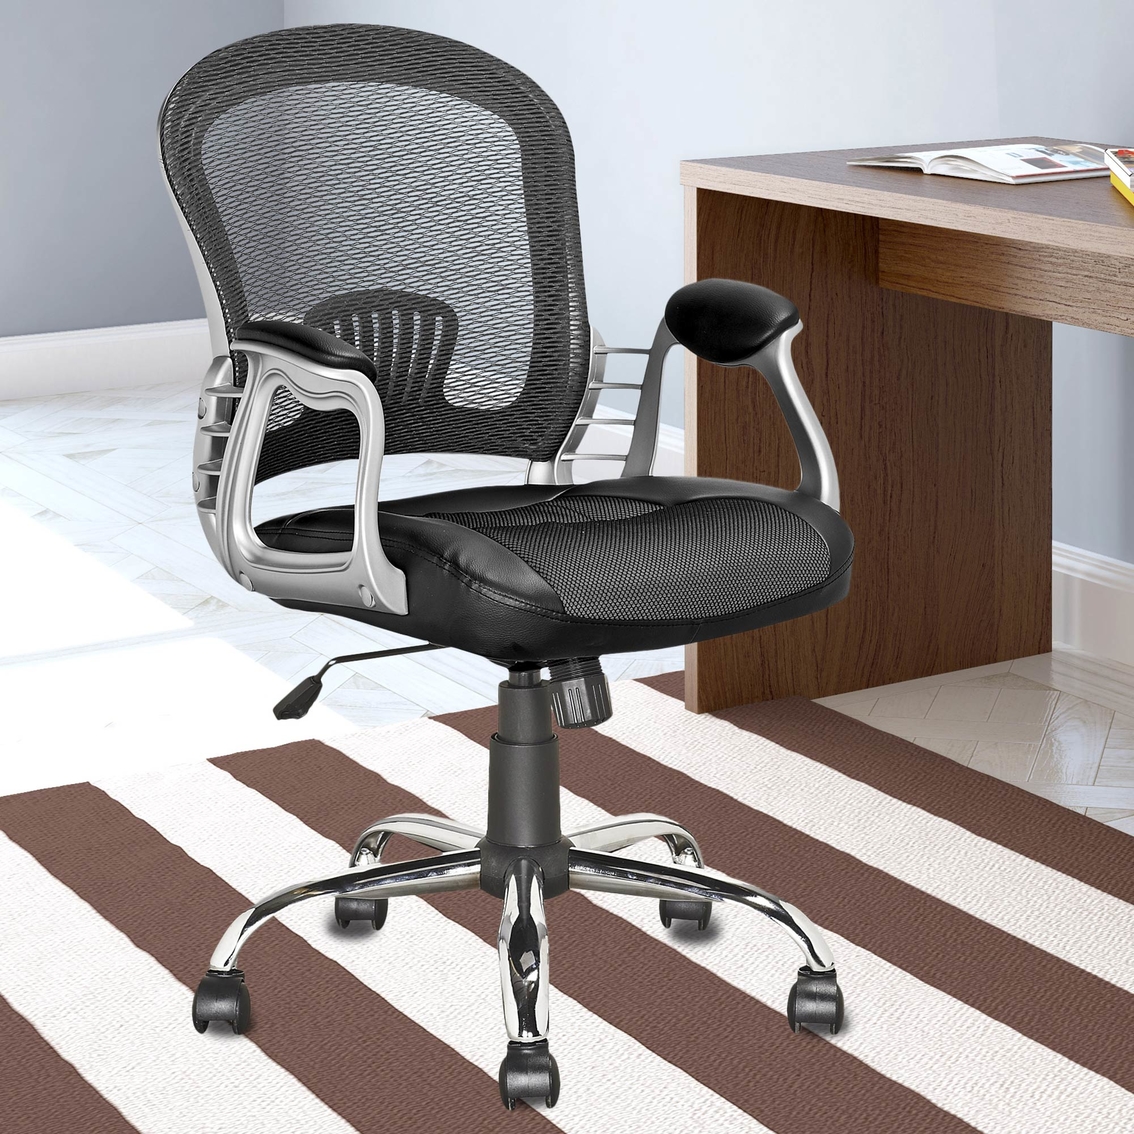 CorLiving Black Leatherette Office Chair - Image 4 of 4